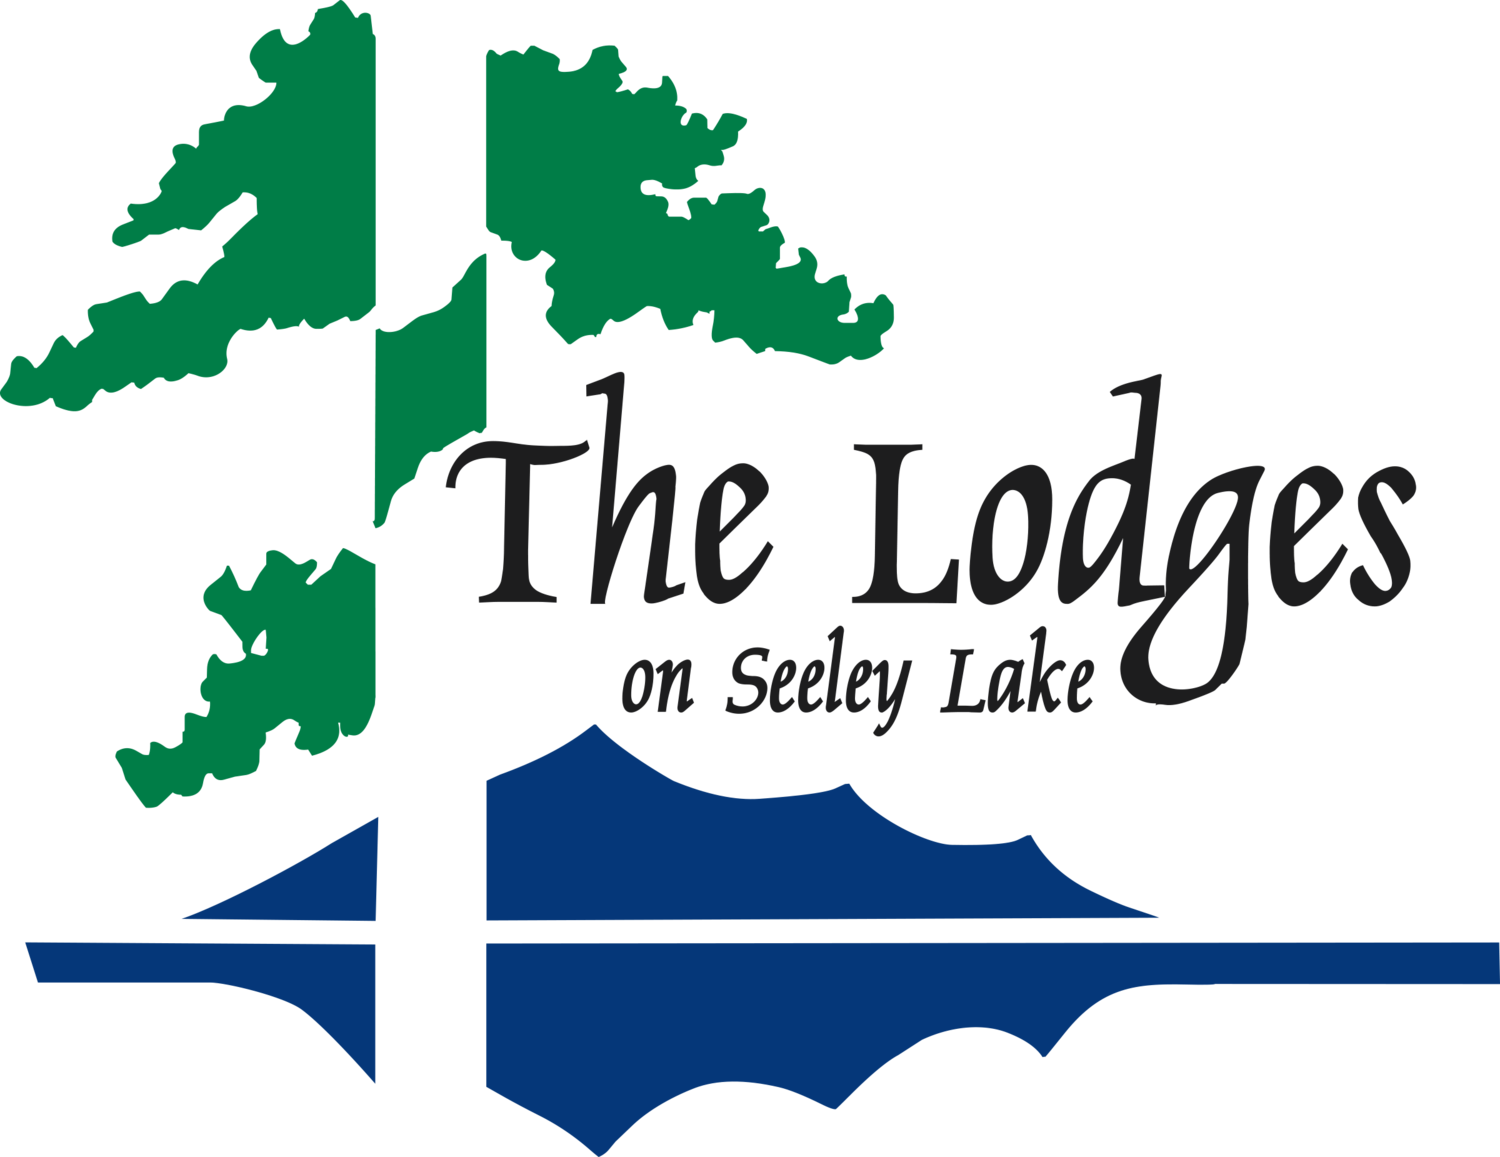 The Lodges on Seeley Lake